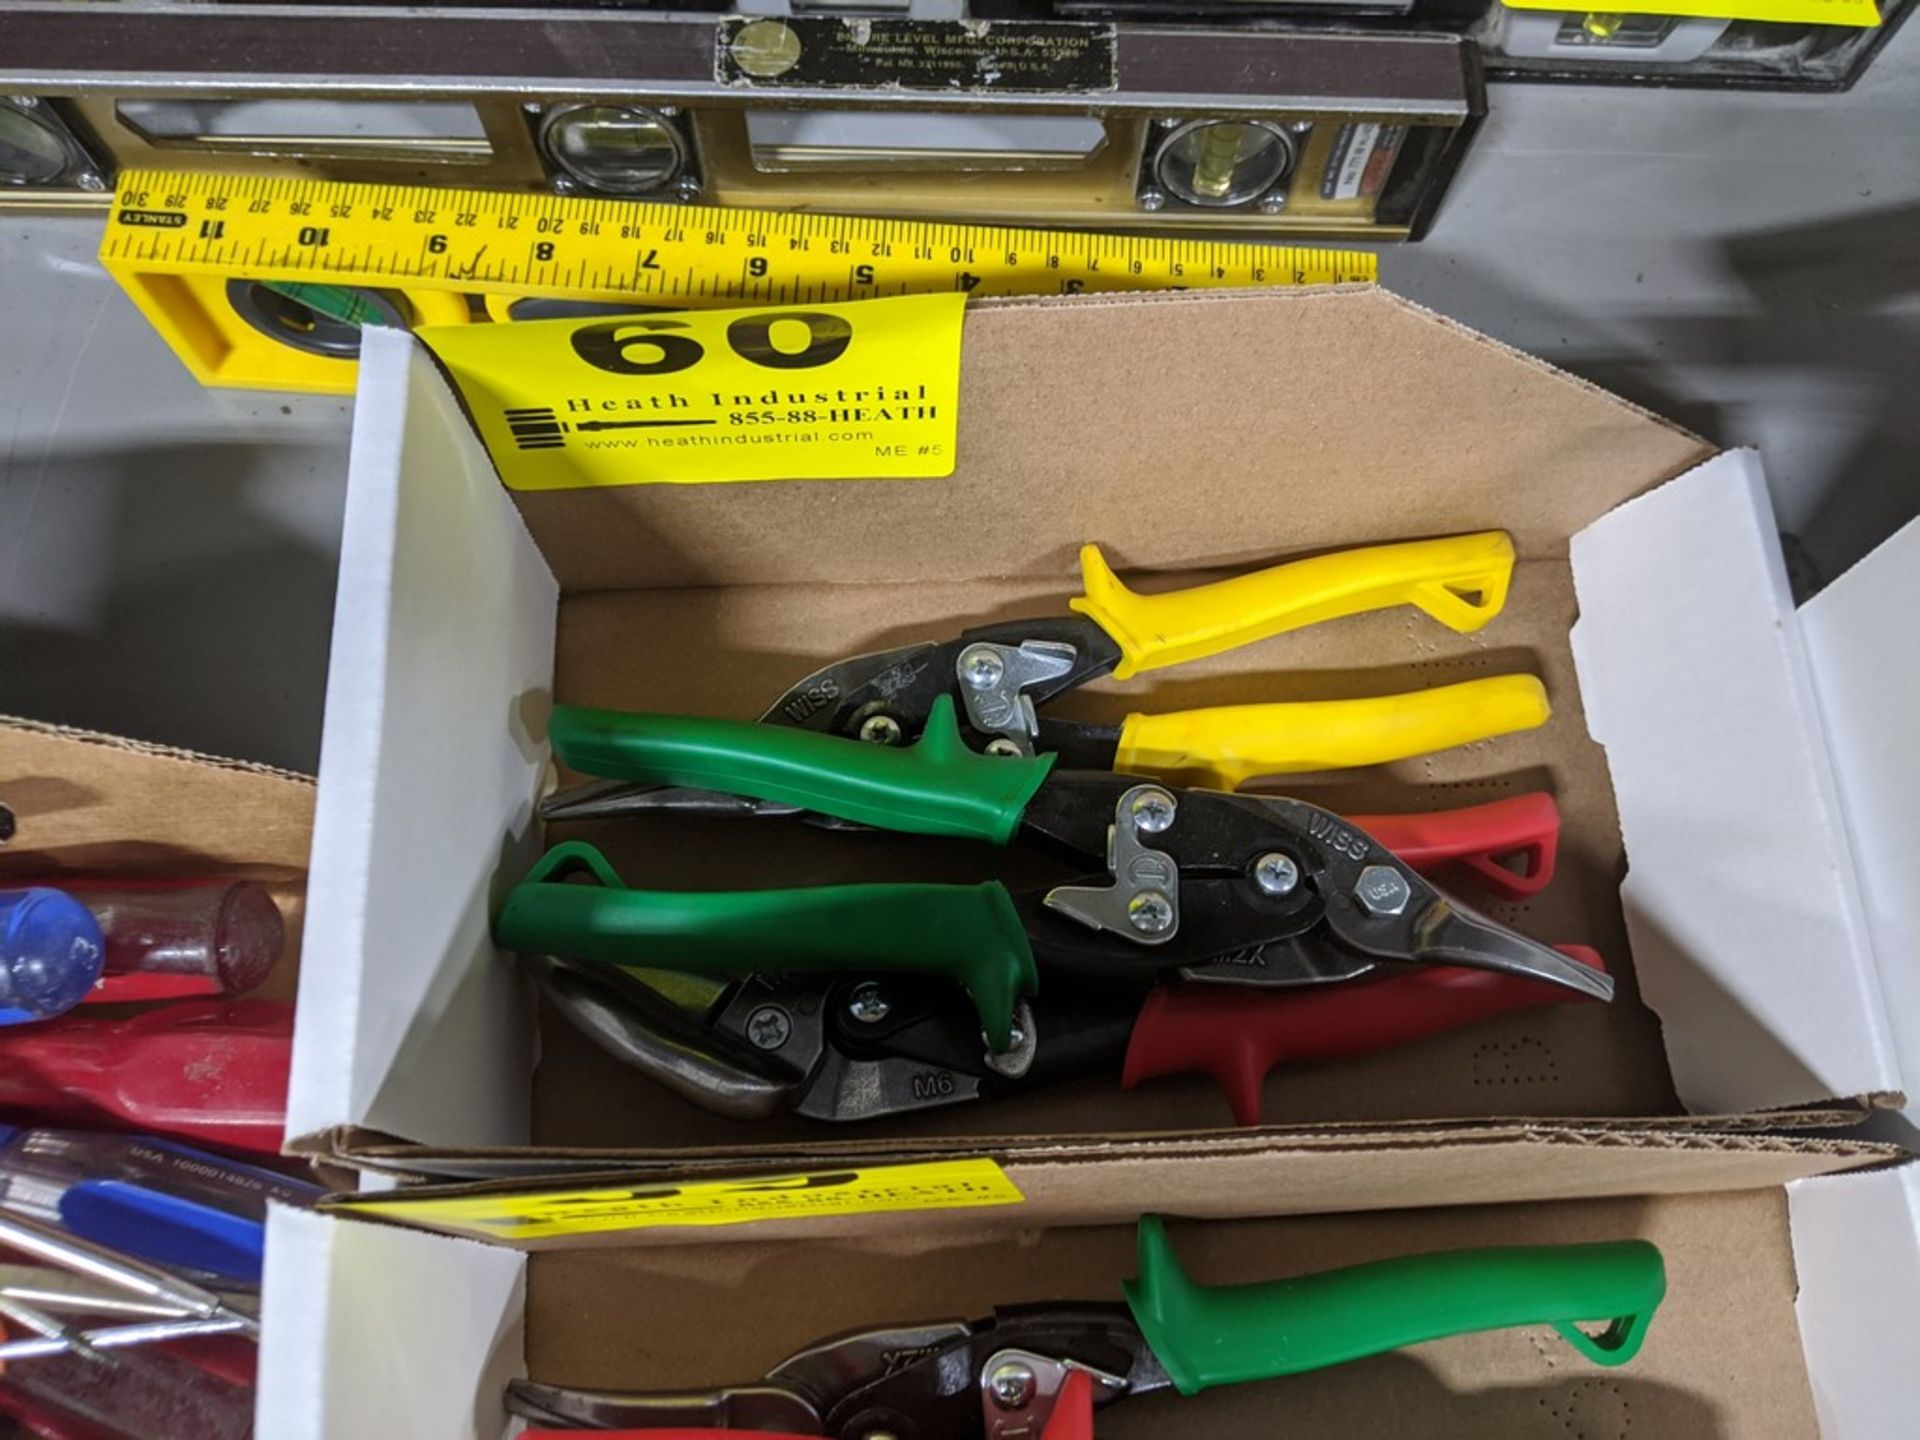 (3) WISS AVIATION SNIPS, LEFT, RIGHT & STRAIGHT CUT